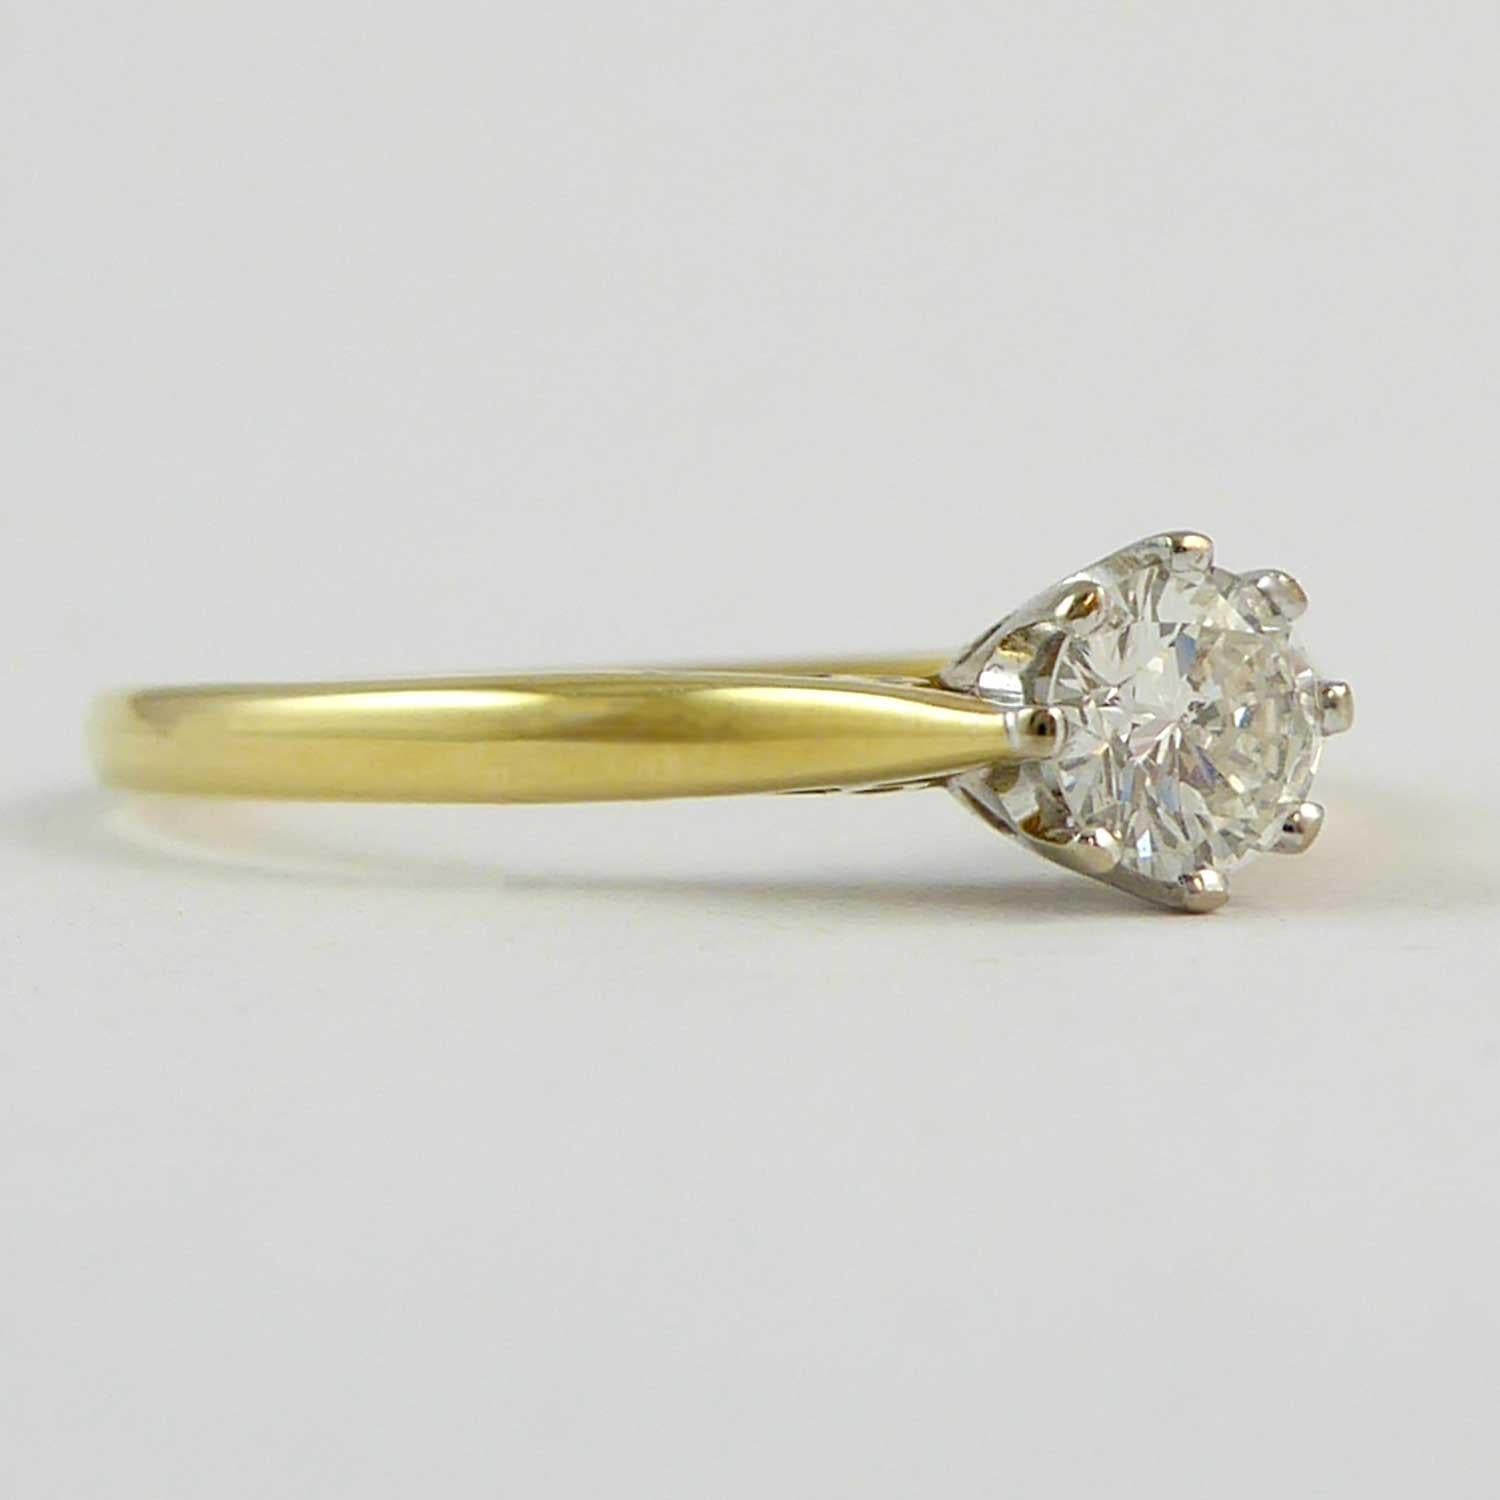 A vintage diamond ring from the 1980s being an eight-claw set brilliant cut diamond approx. 0.25ct and with assessed colour and clarity of I-J and SI2-I1 respectively.  In a white gold metal rex solitair mount to a yellow gold D shaped cross section